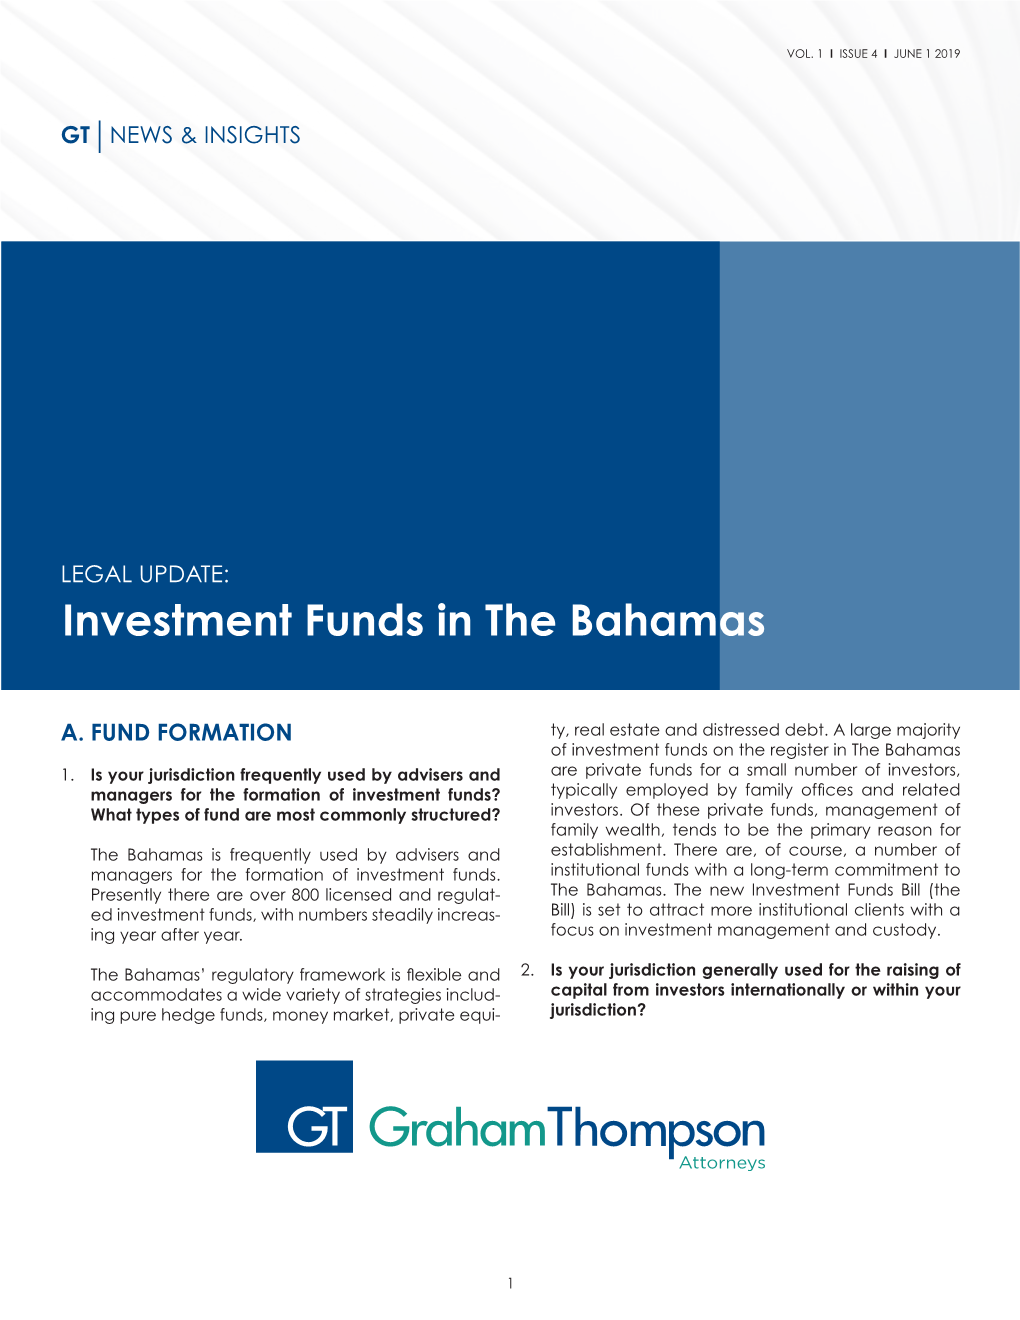 Investment Funds in the Bahamas